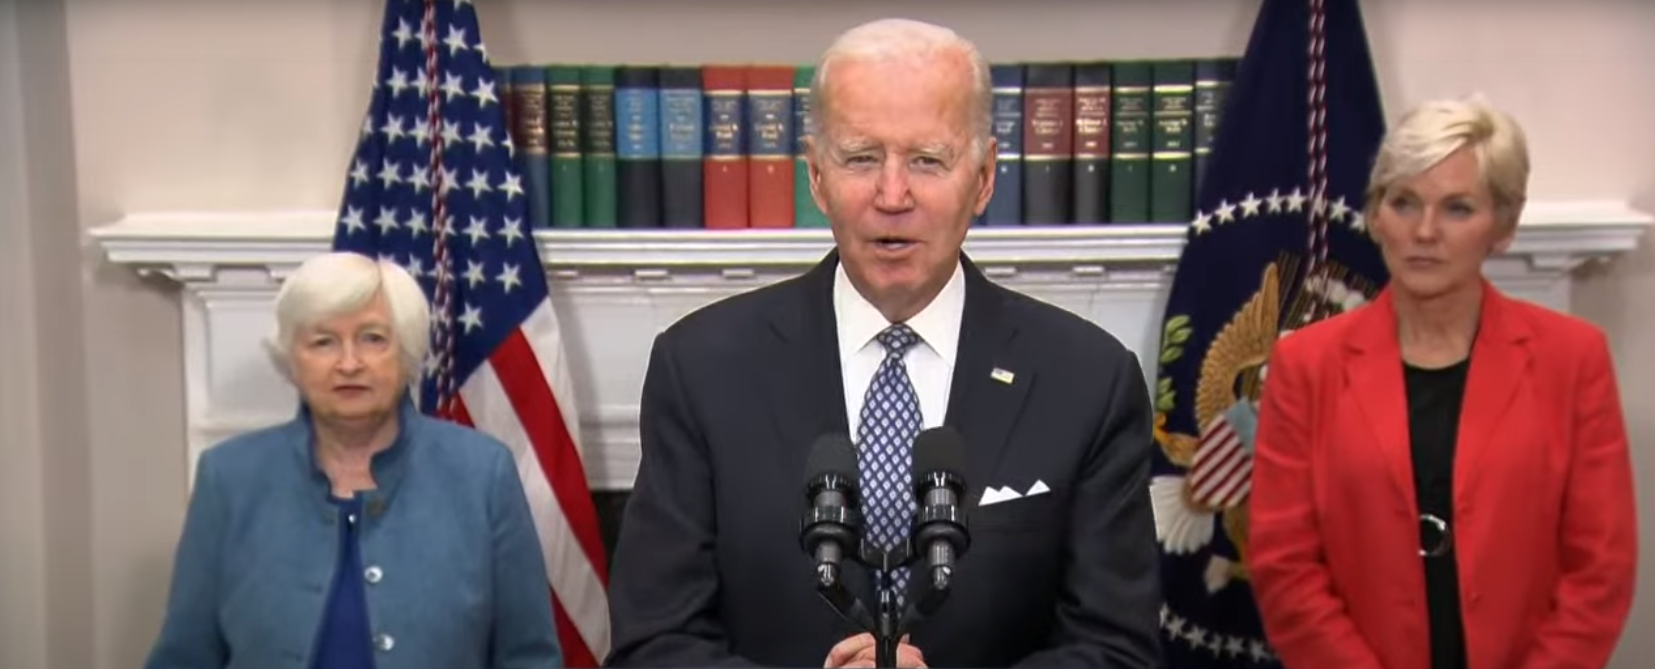 You are currently viewing MRP 178:  We React to Biden Claim that Oil Industry is Not Innovative